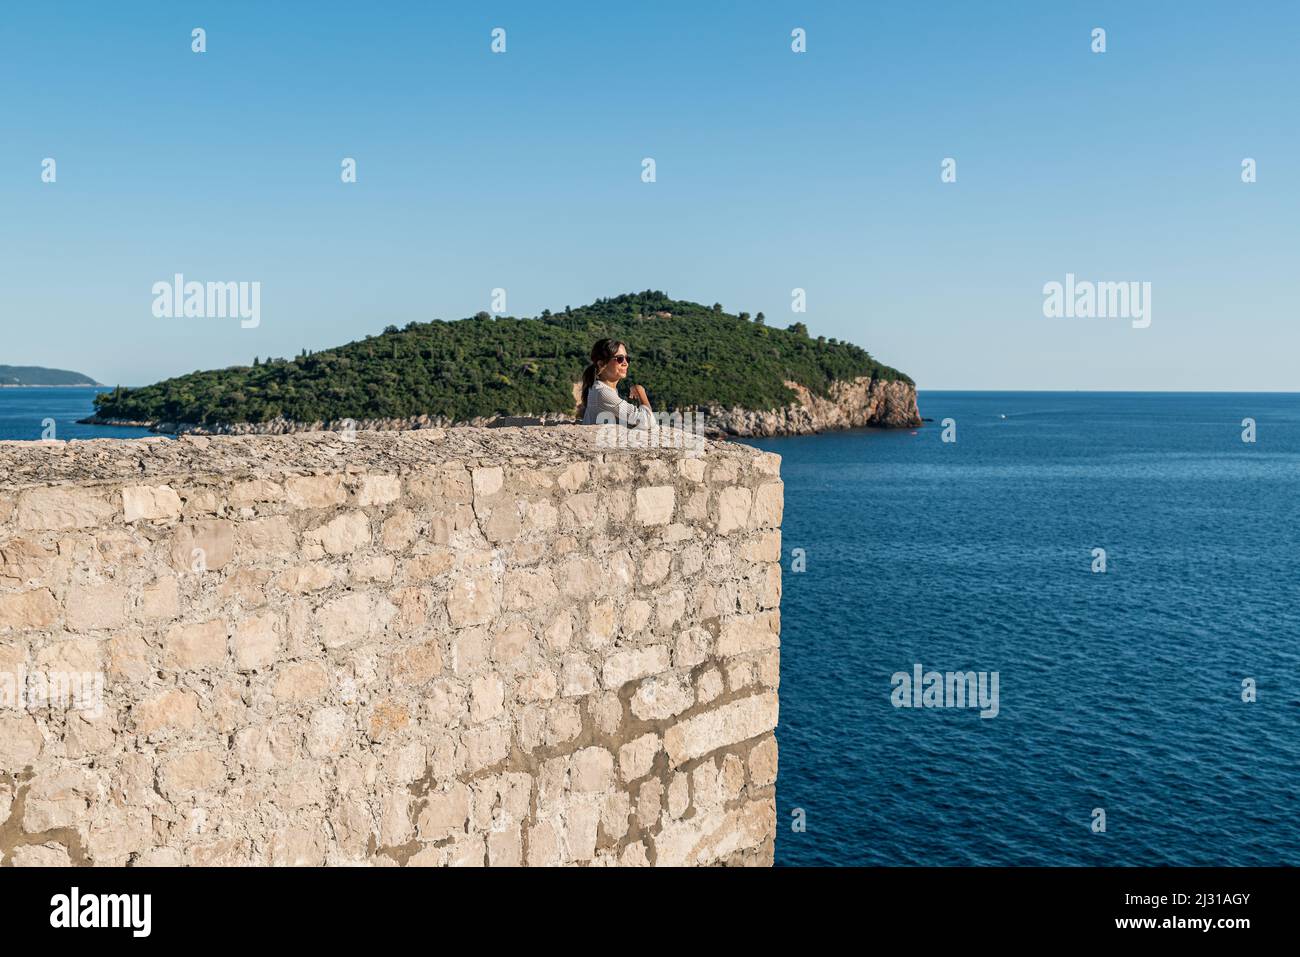 Woman looks out to sea from the city walls of the old town in Dubrovnik, Dalmatia, Croatia. Stock Photo